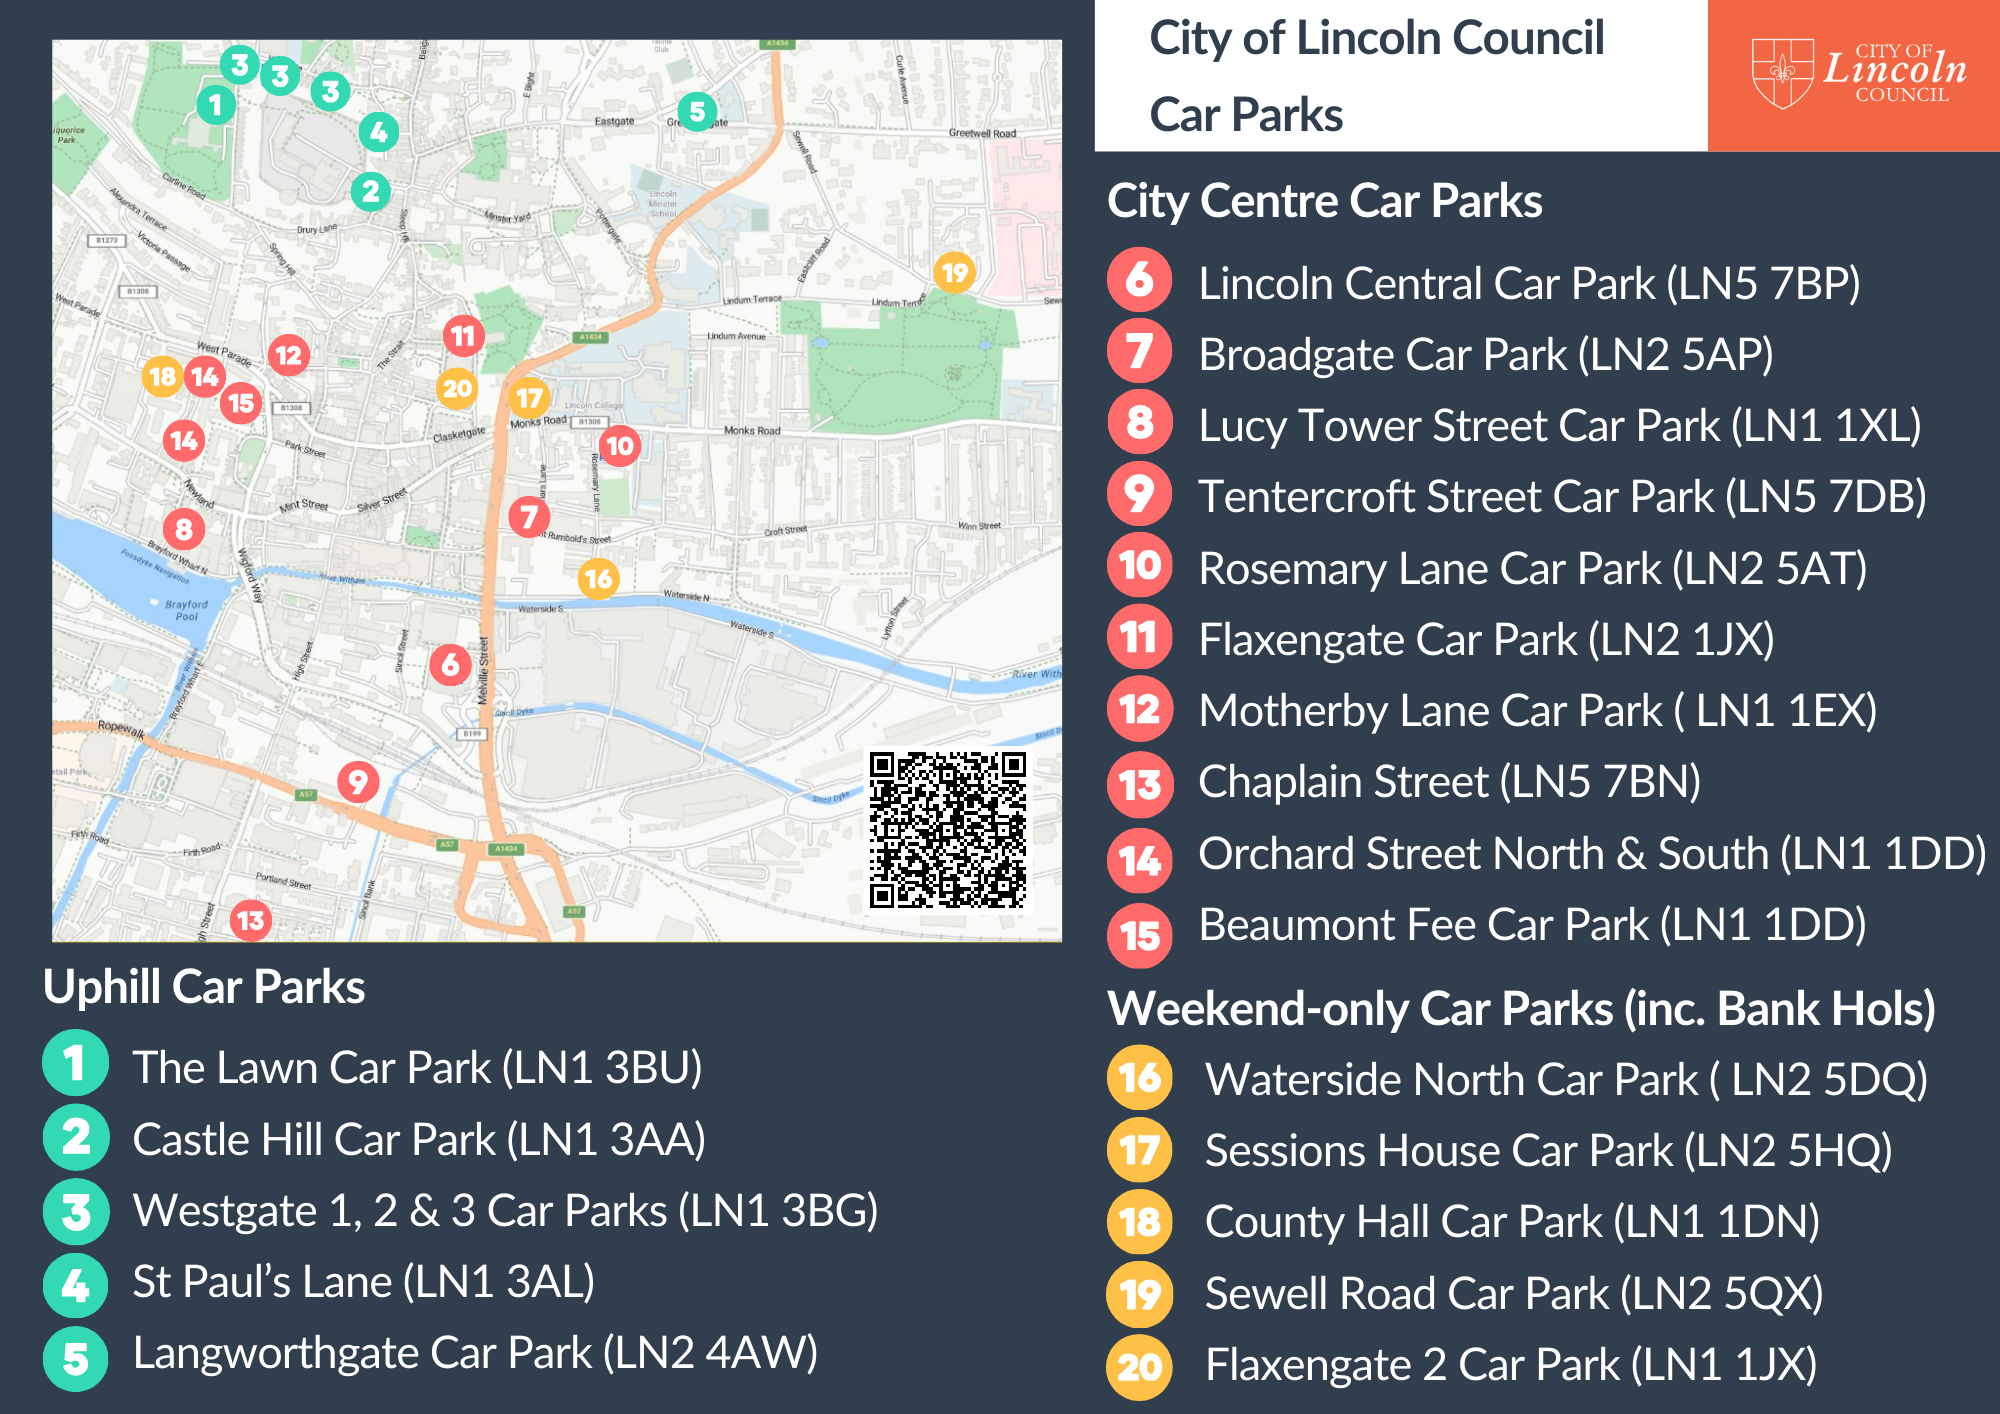 Map of Lincoln with list of City of Lincoln car parks